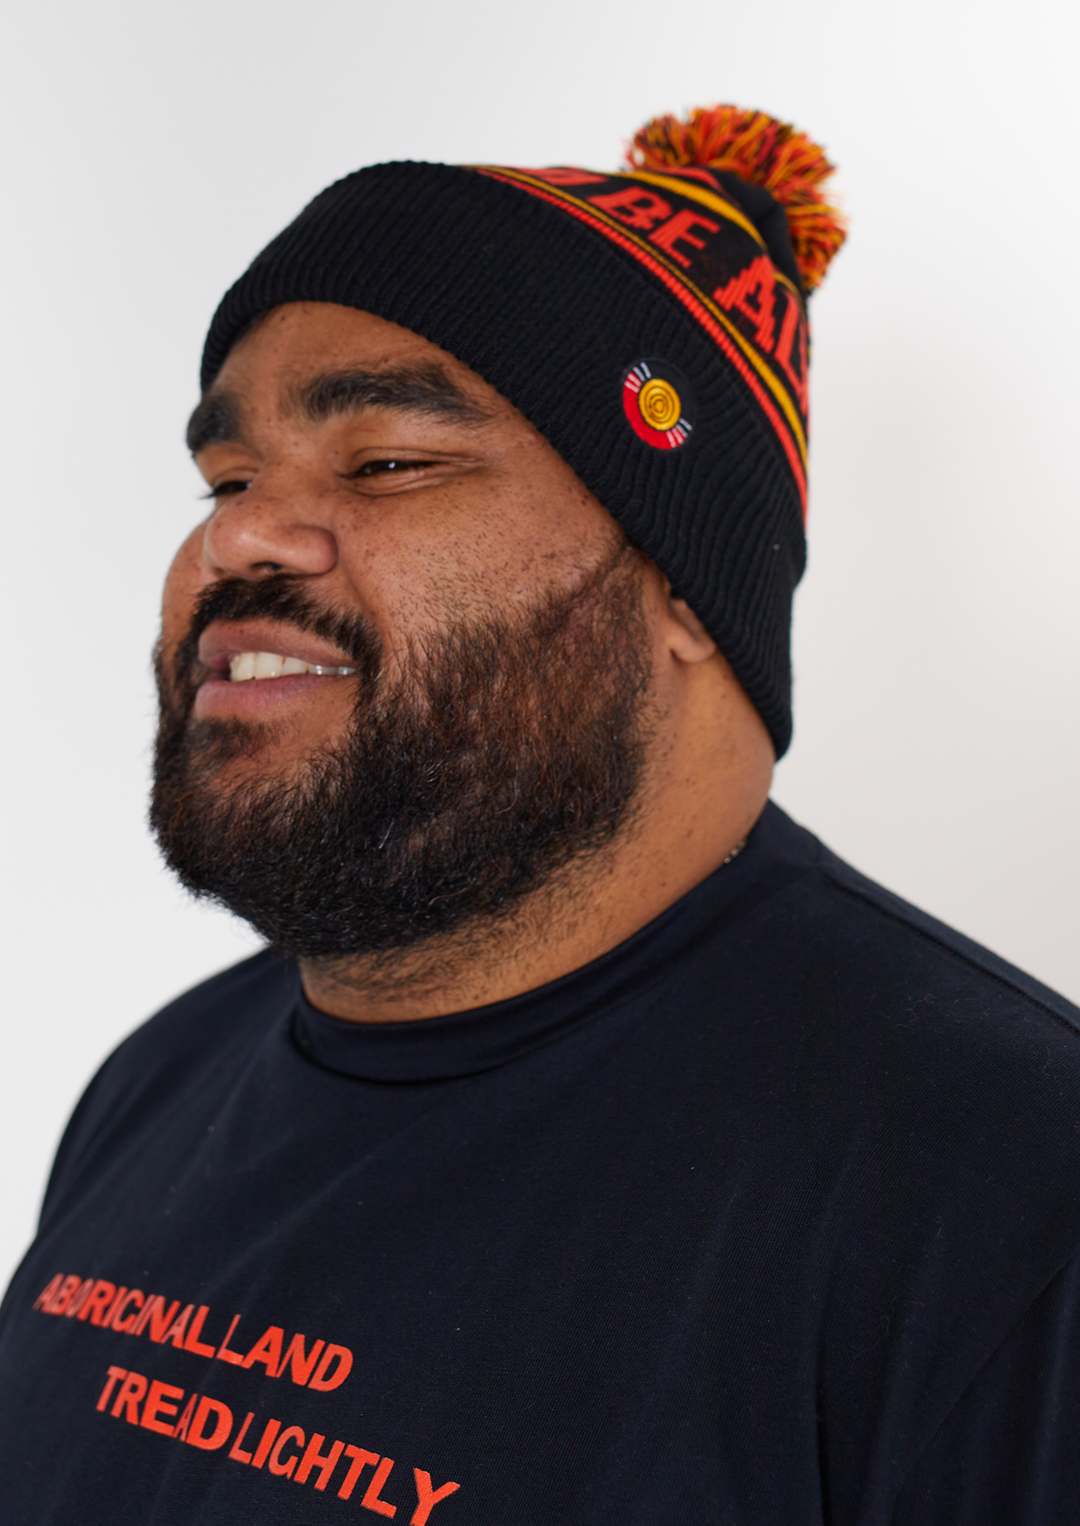 Clothing The Gaps. Power Beanie. Black base with two skinny red and yellow lines above and below bold capital red text 'Always was, Always will be.' Red, black and yellow pom on top of beanie. Embroidered clothing the gap.